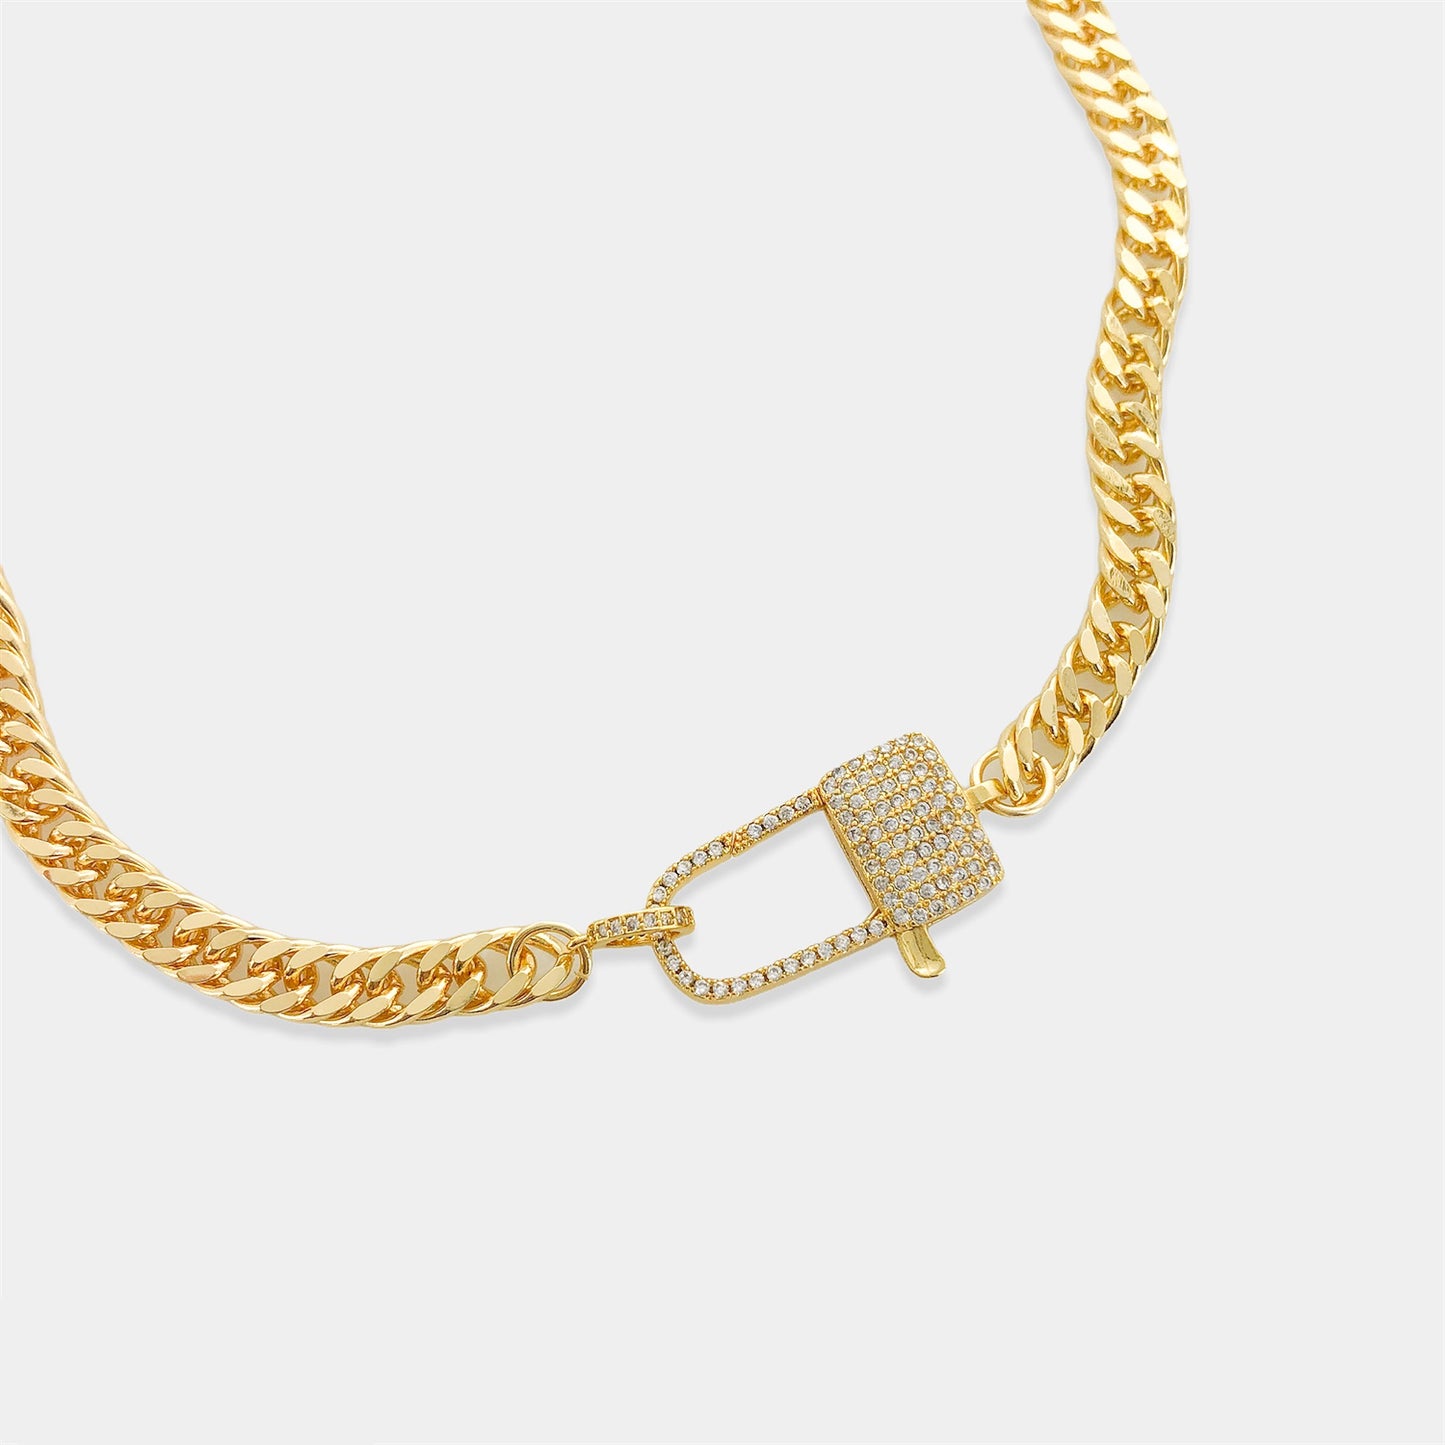 Lobster Clasp Lock Curb Chain Necklace